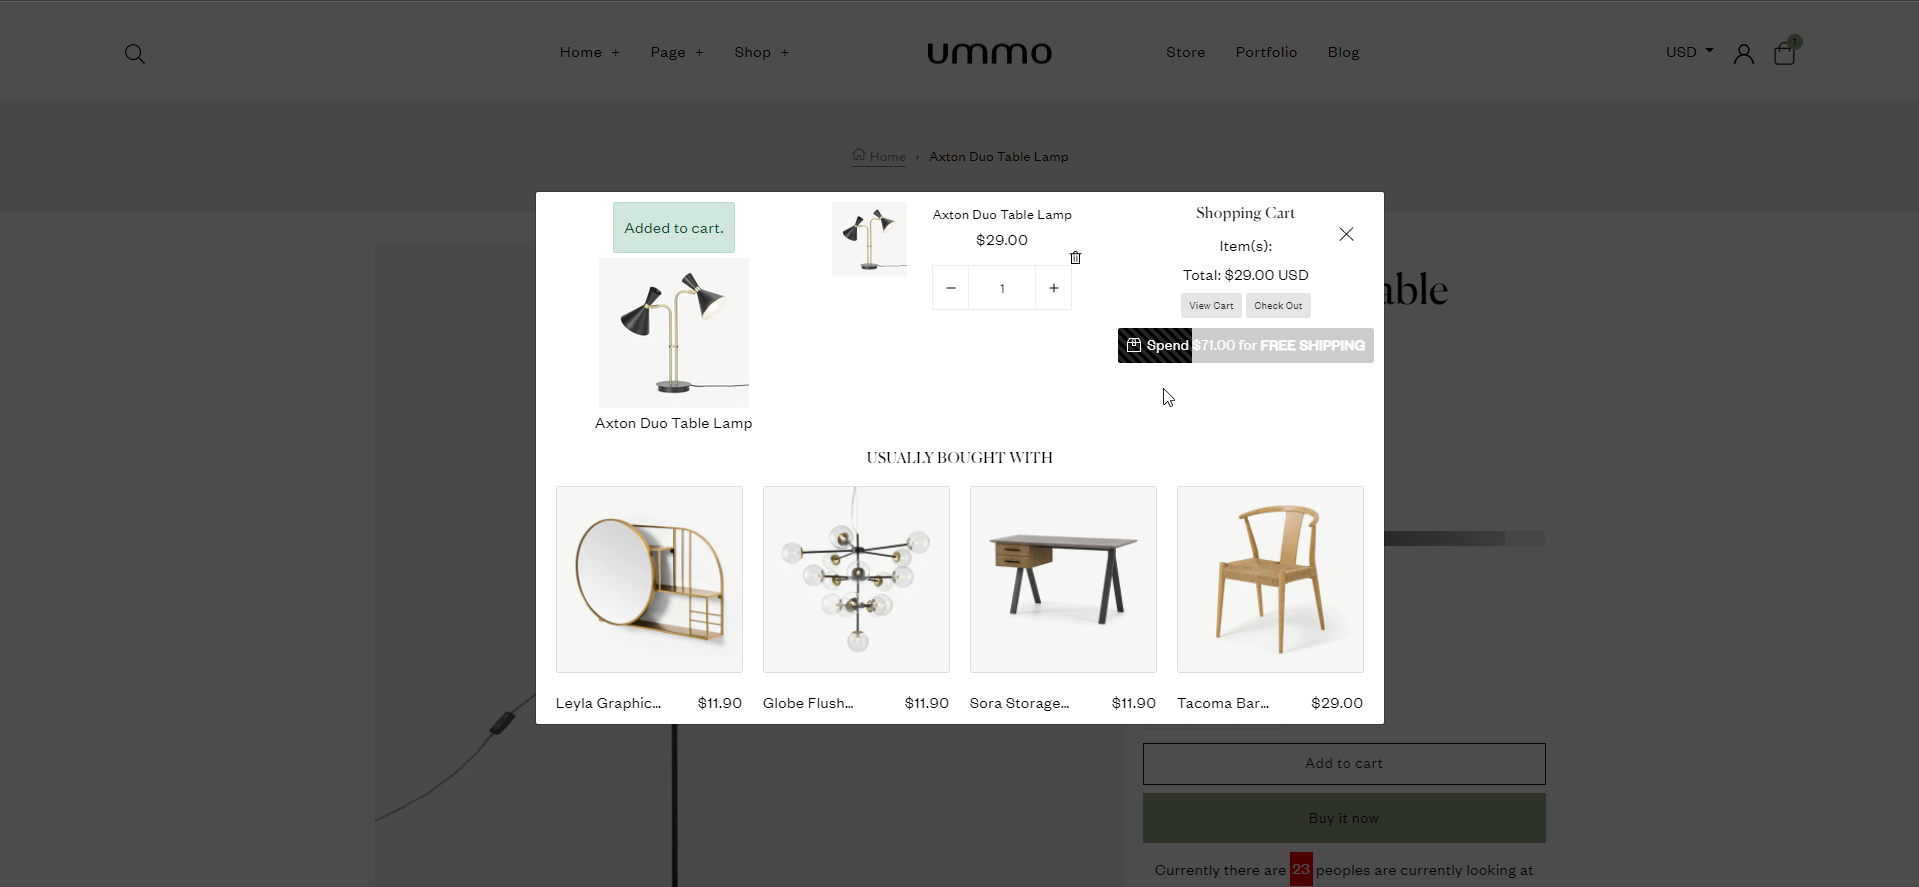 cross-selling feature in apollo shopify framework 5.0